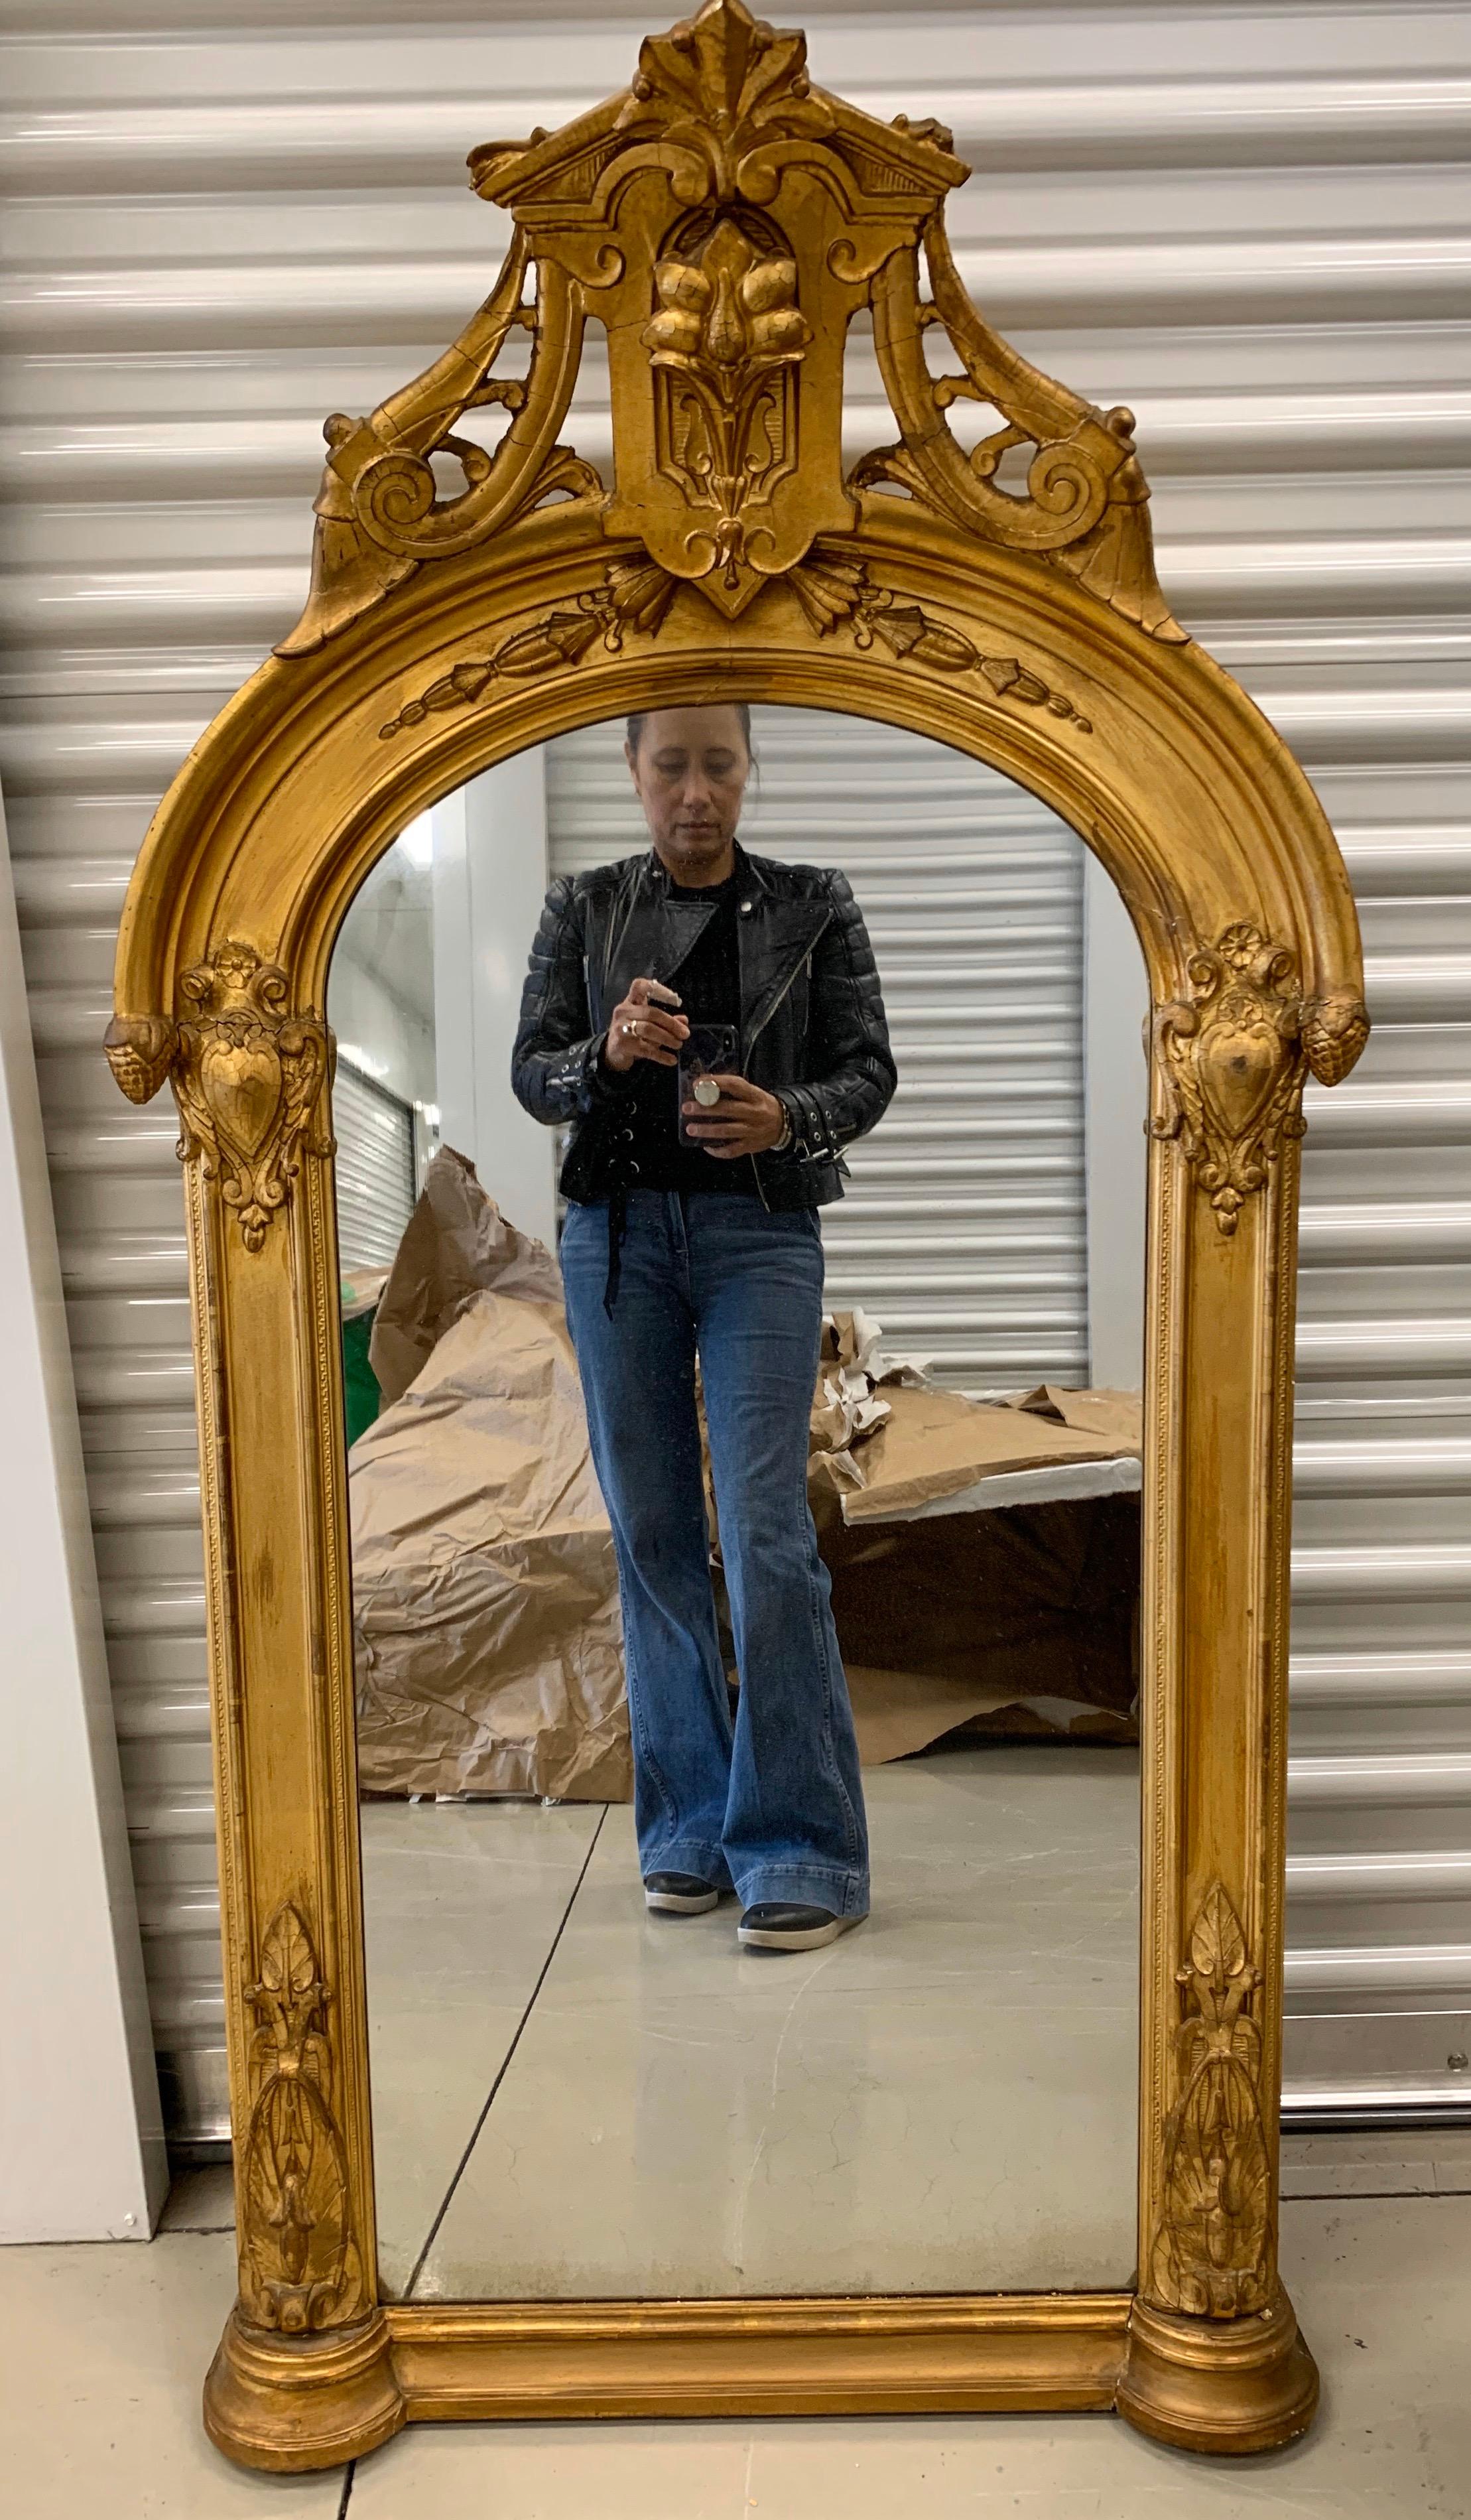 Stunning neoclassical antique mirror that will sit on a mantel or hang on wall, your choice. What makes this antique mirror truly special is the carved giltwood finial that bows out at top. There are some areas of chipping and cracking in the